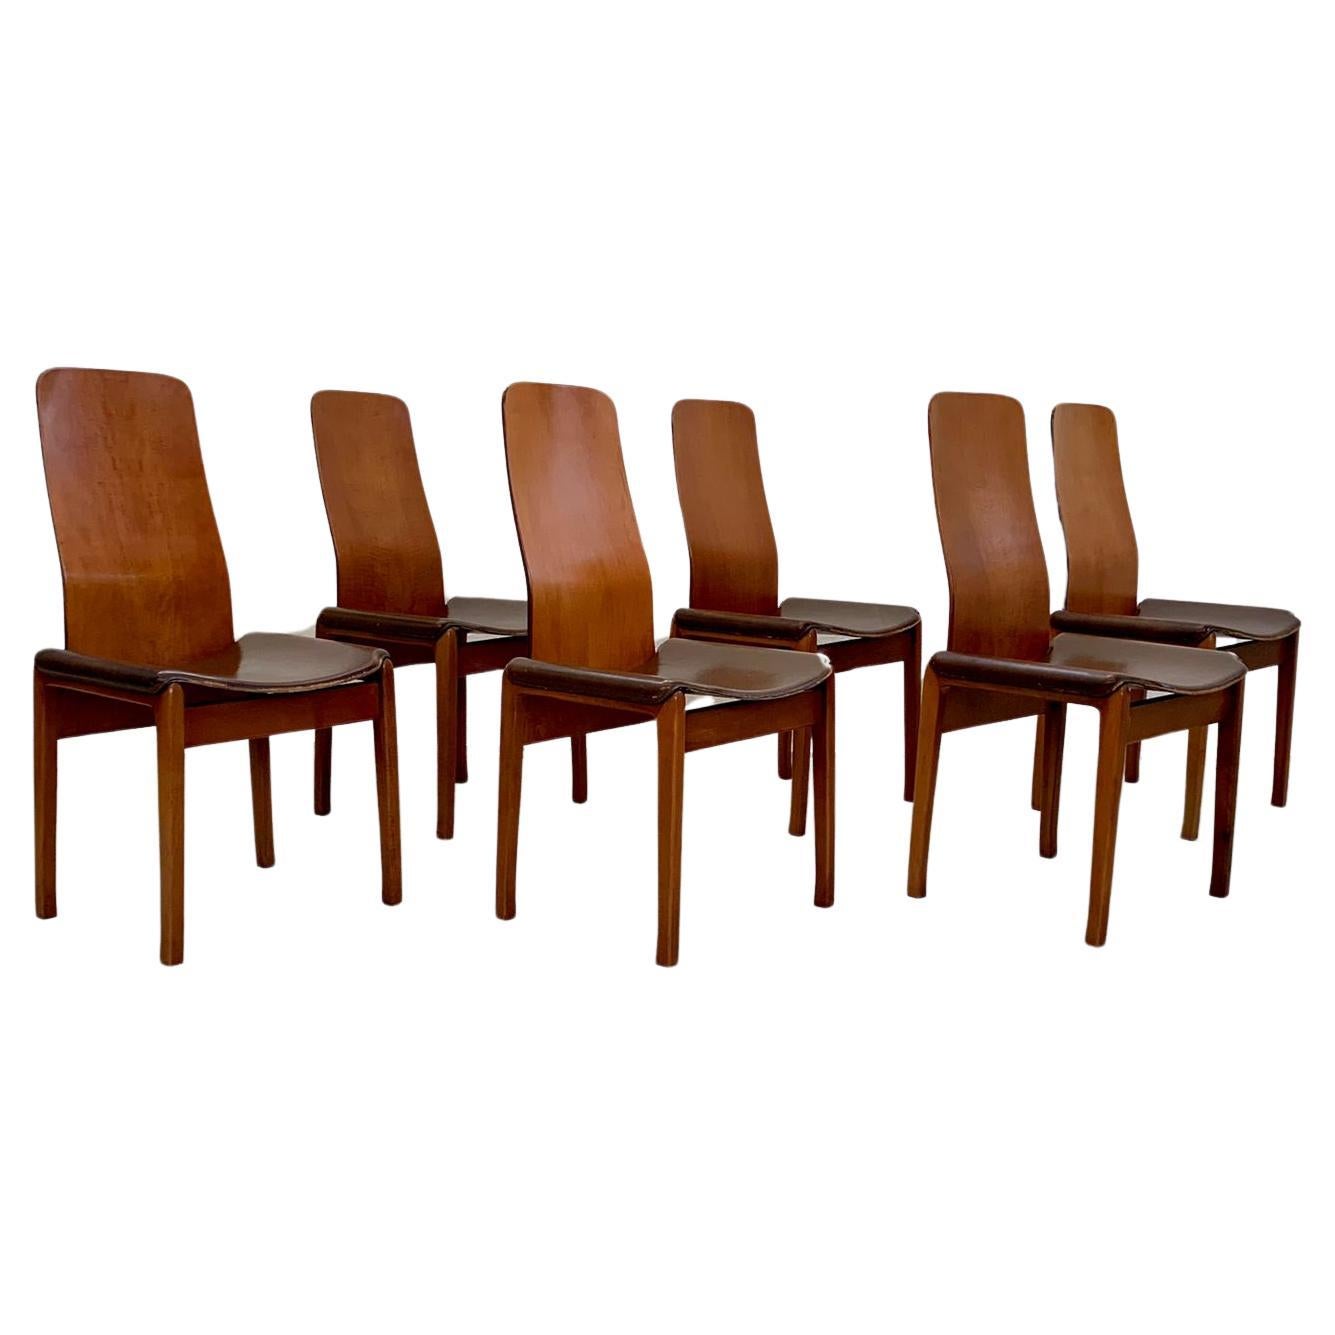 Set of Fiorenza chairs in wood and leather by Tito Agnoli for Molteni, 1968